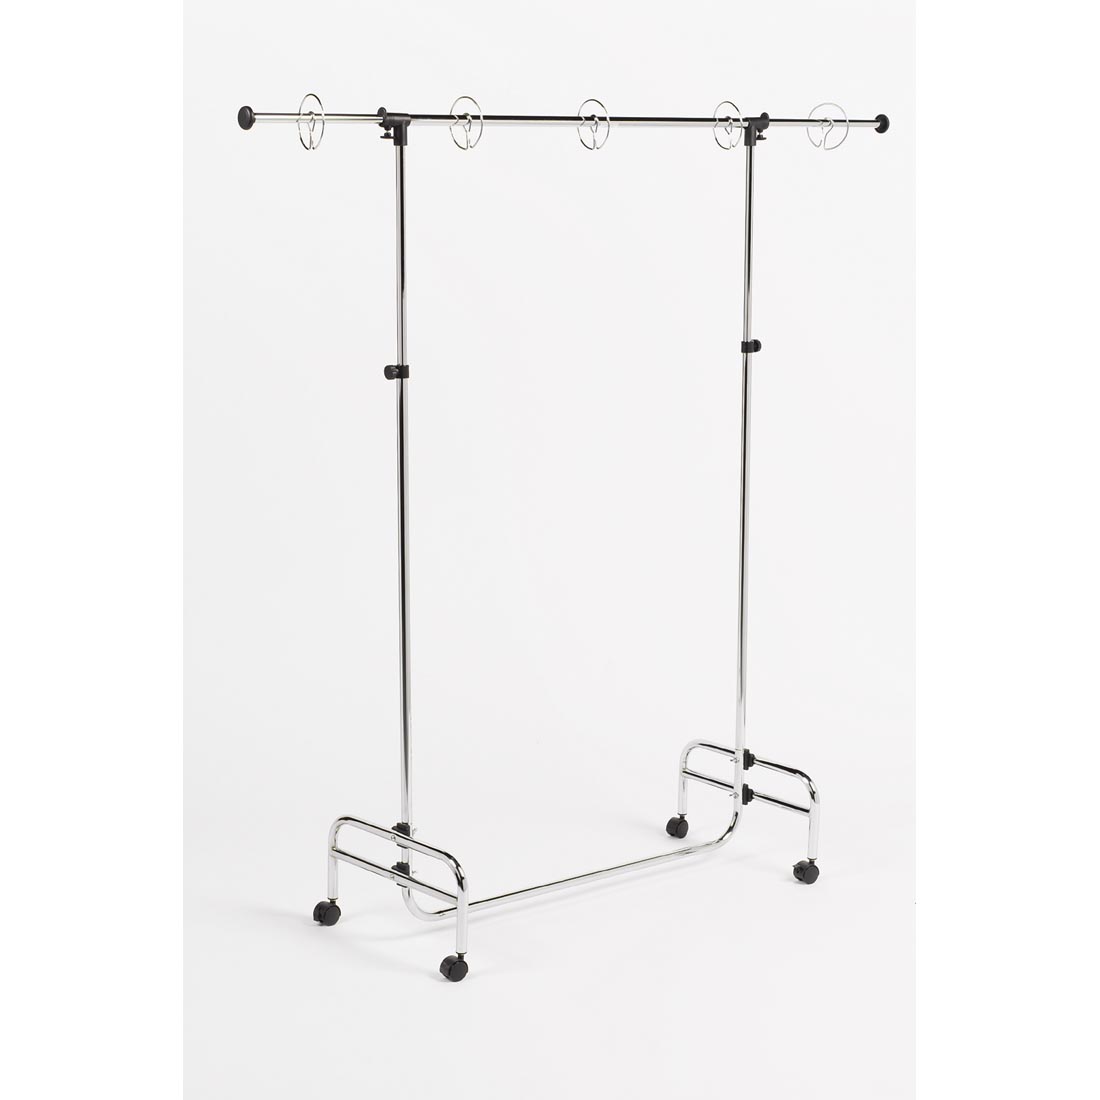 Pacon Adjustable Pocket Chart Stand